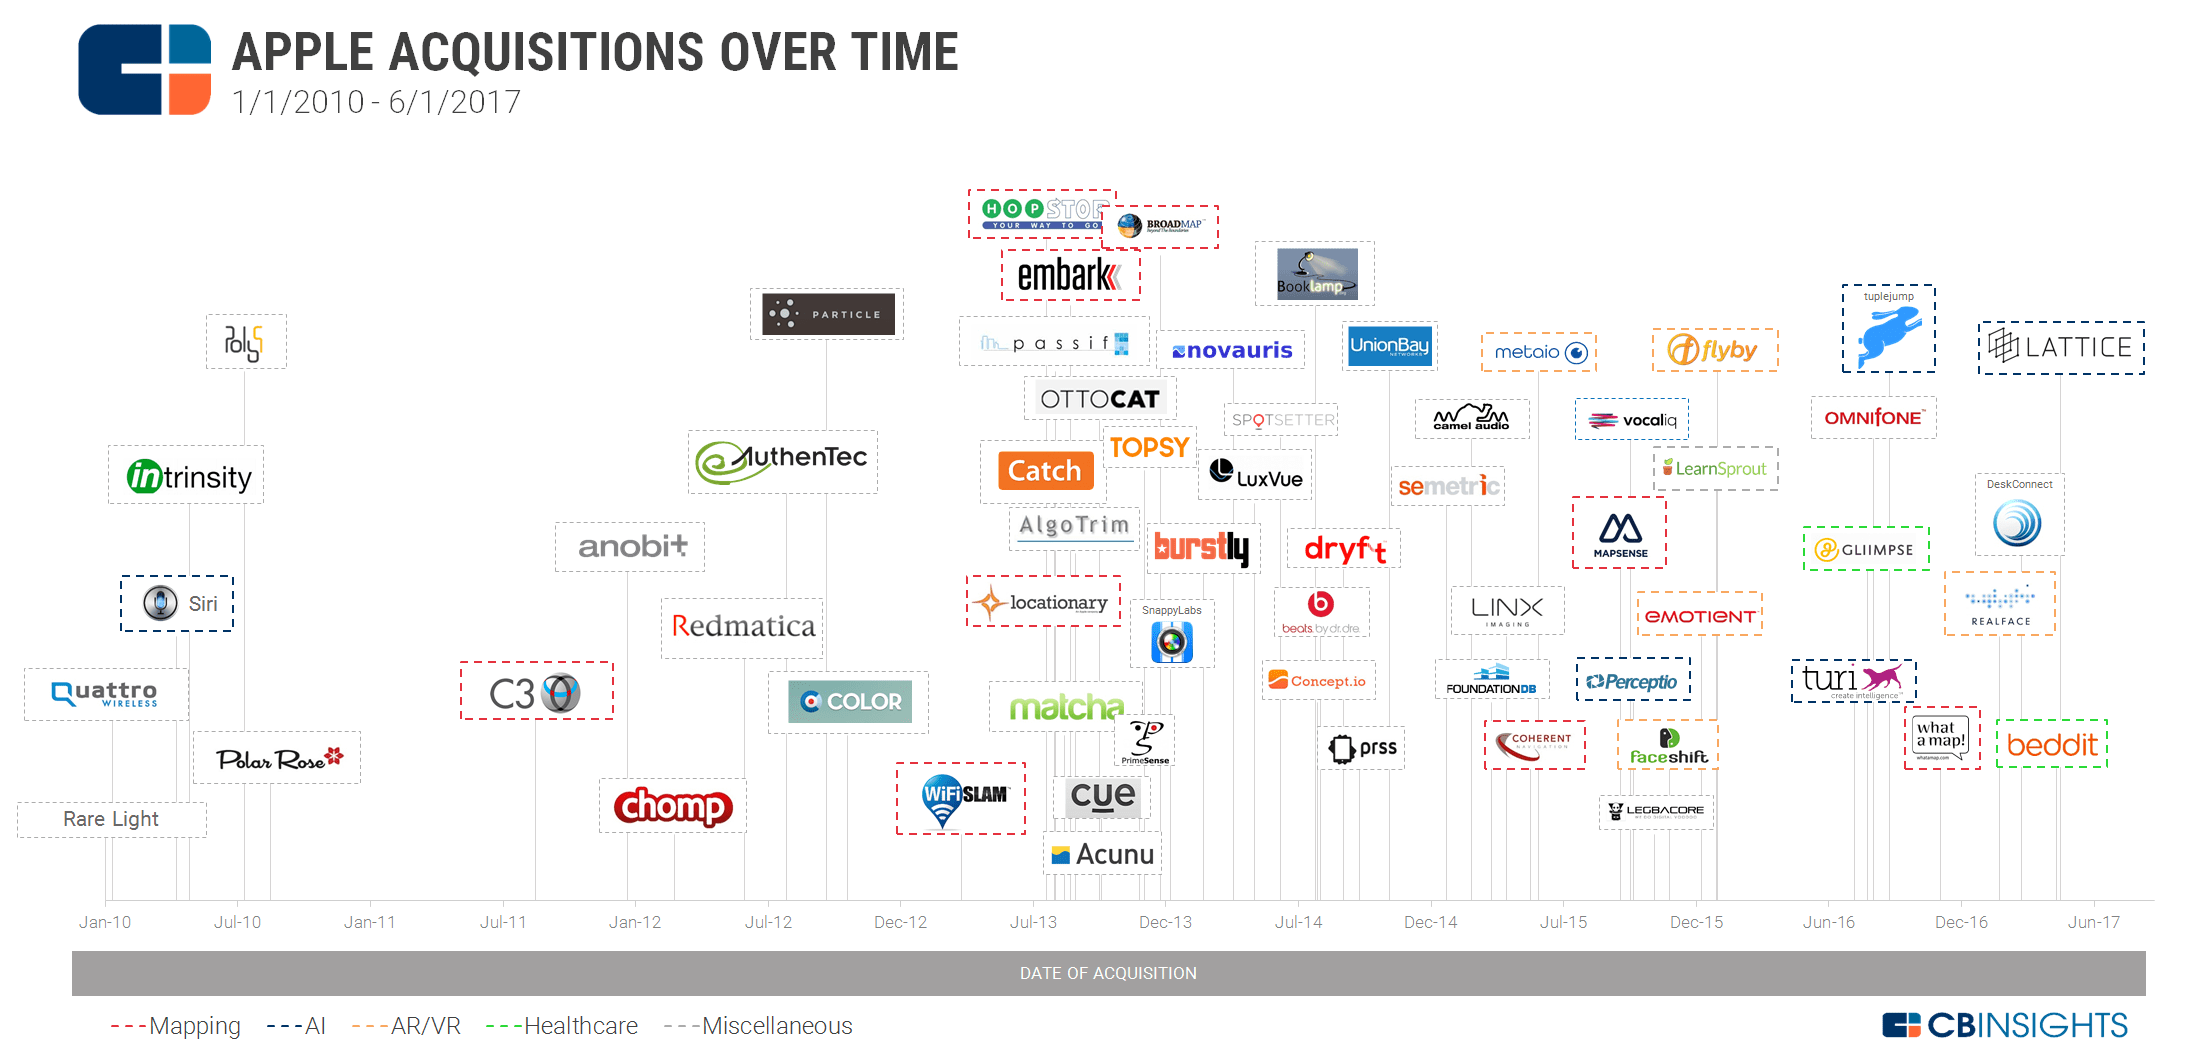 Corporate Tech Giants Working In AR/VR